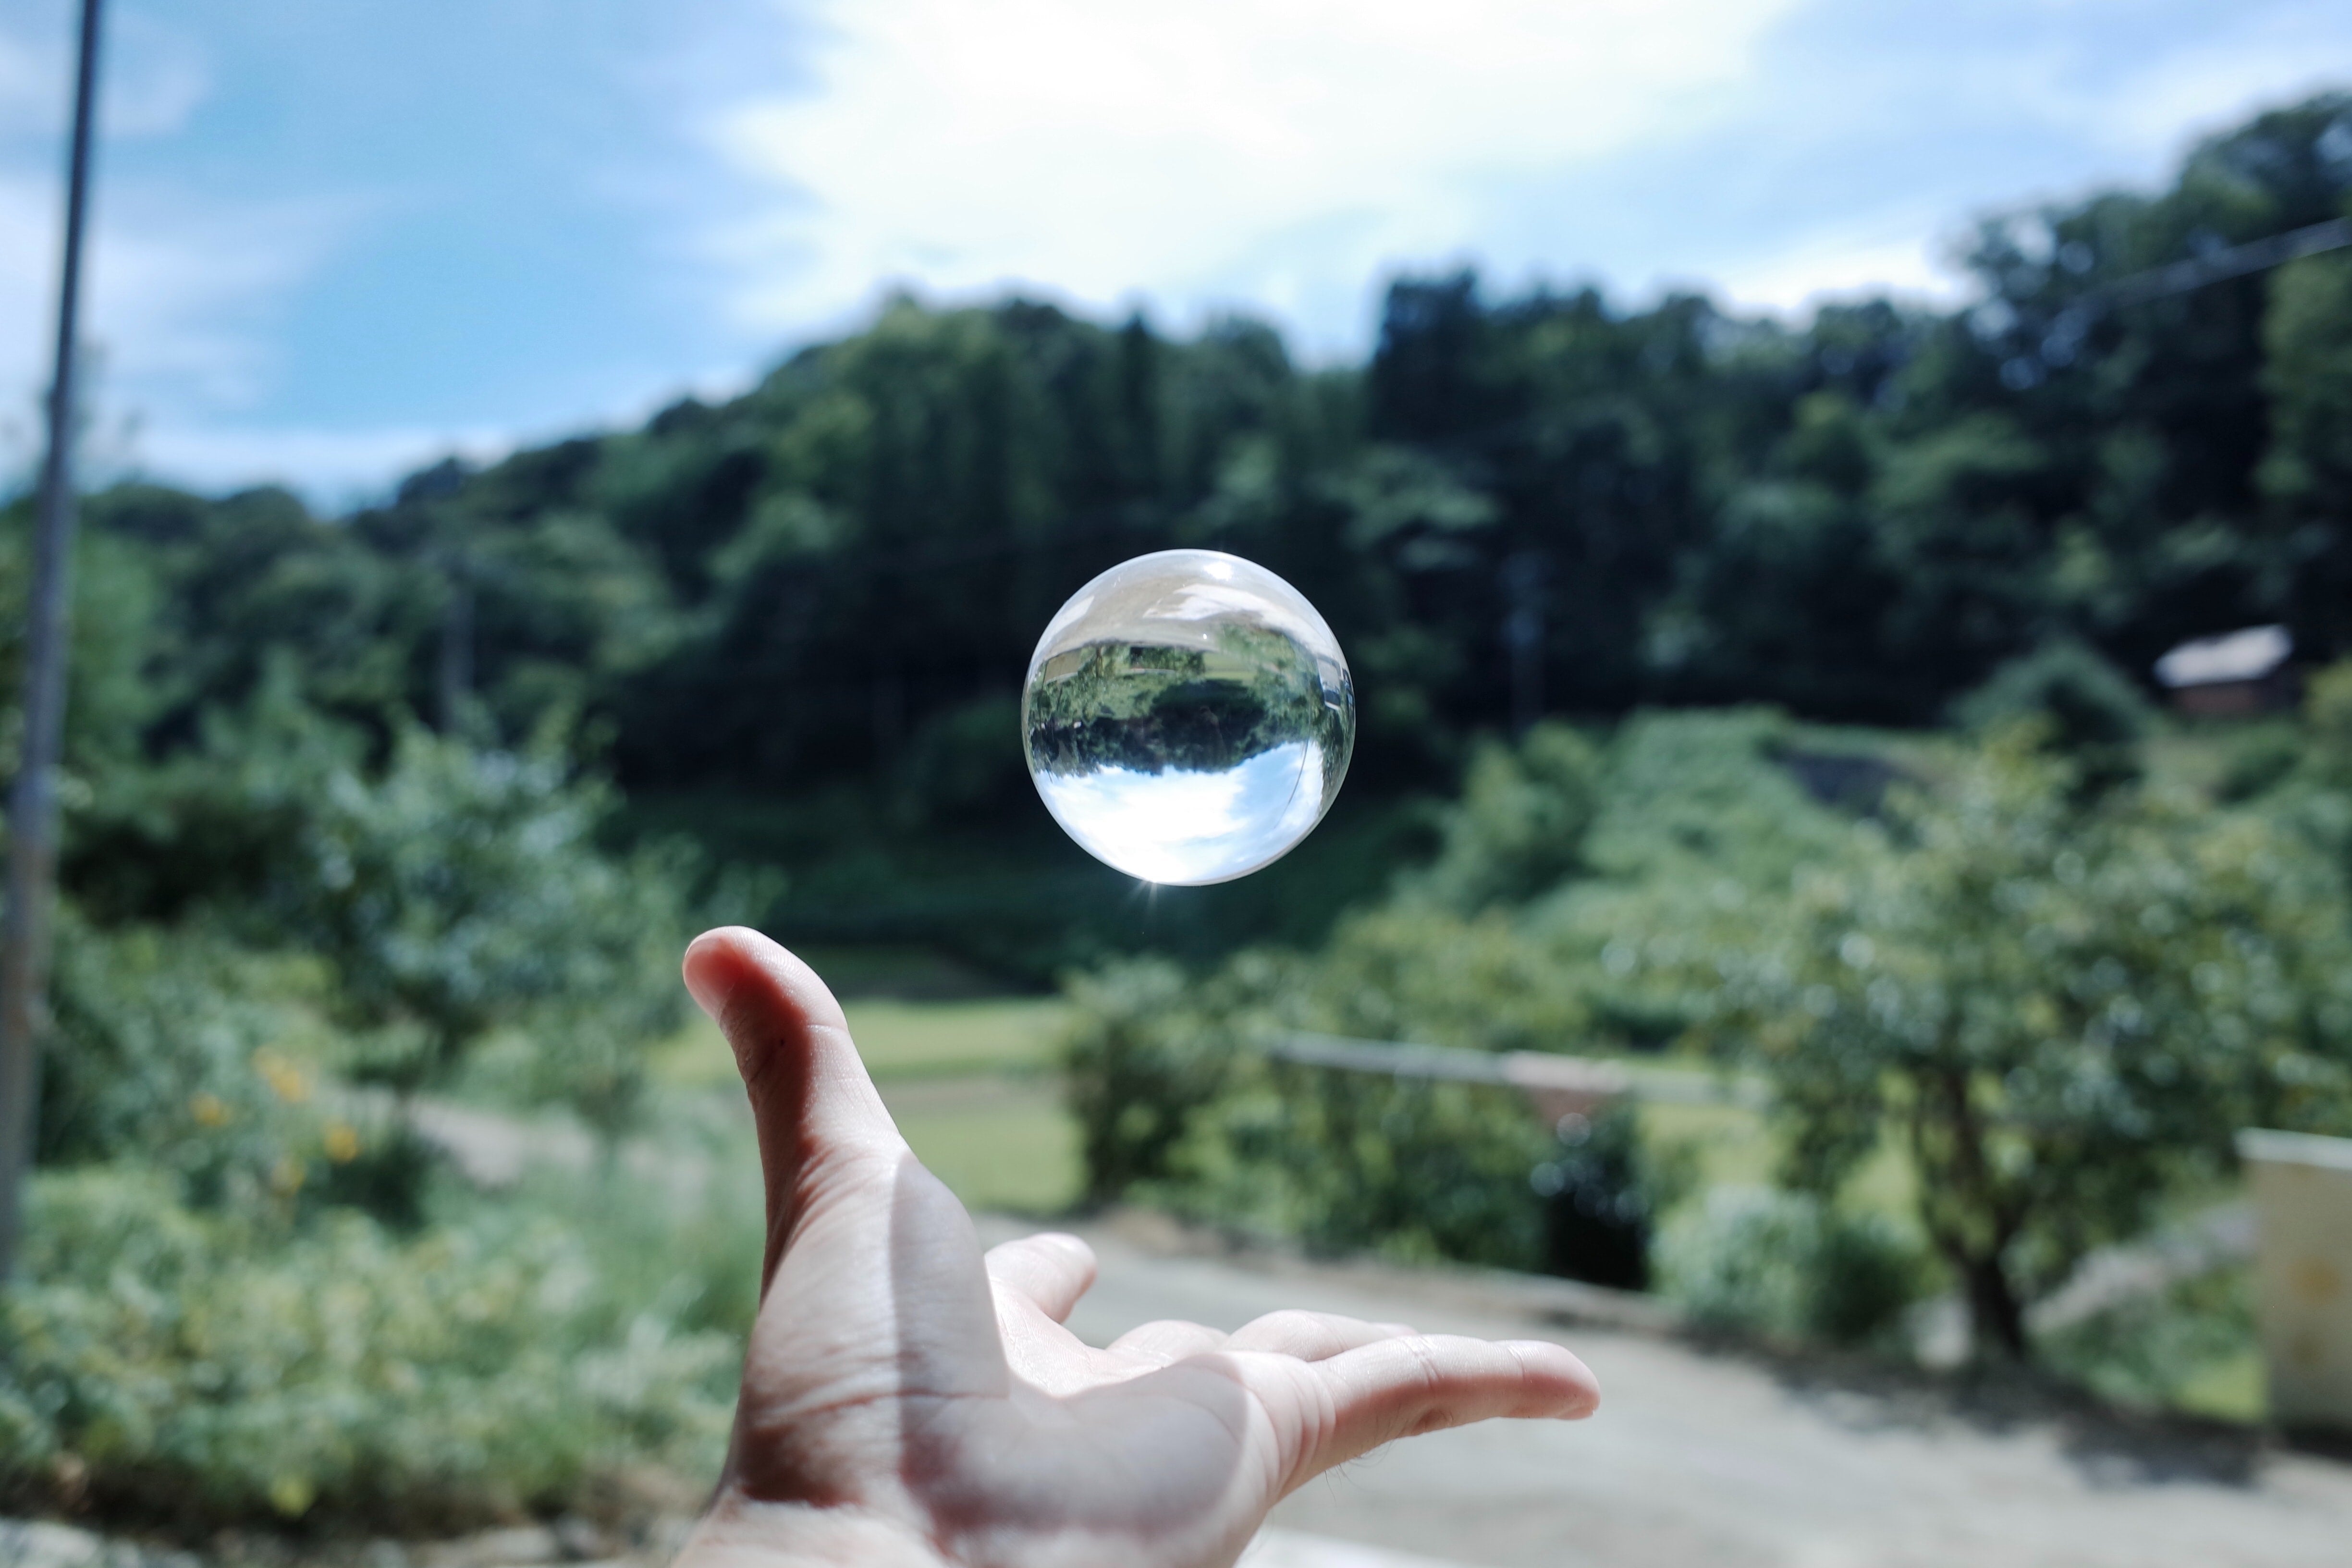 A crystal ball floats over a hand against a backdrop of greenery.